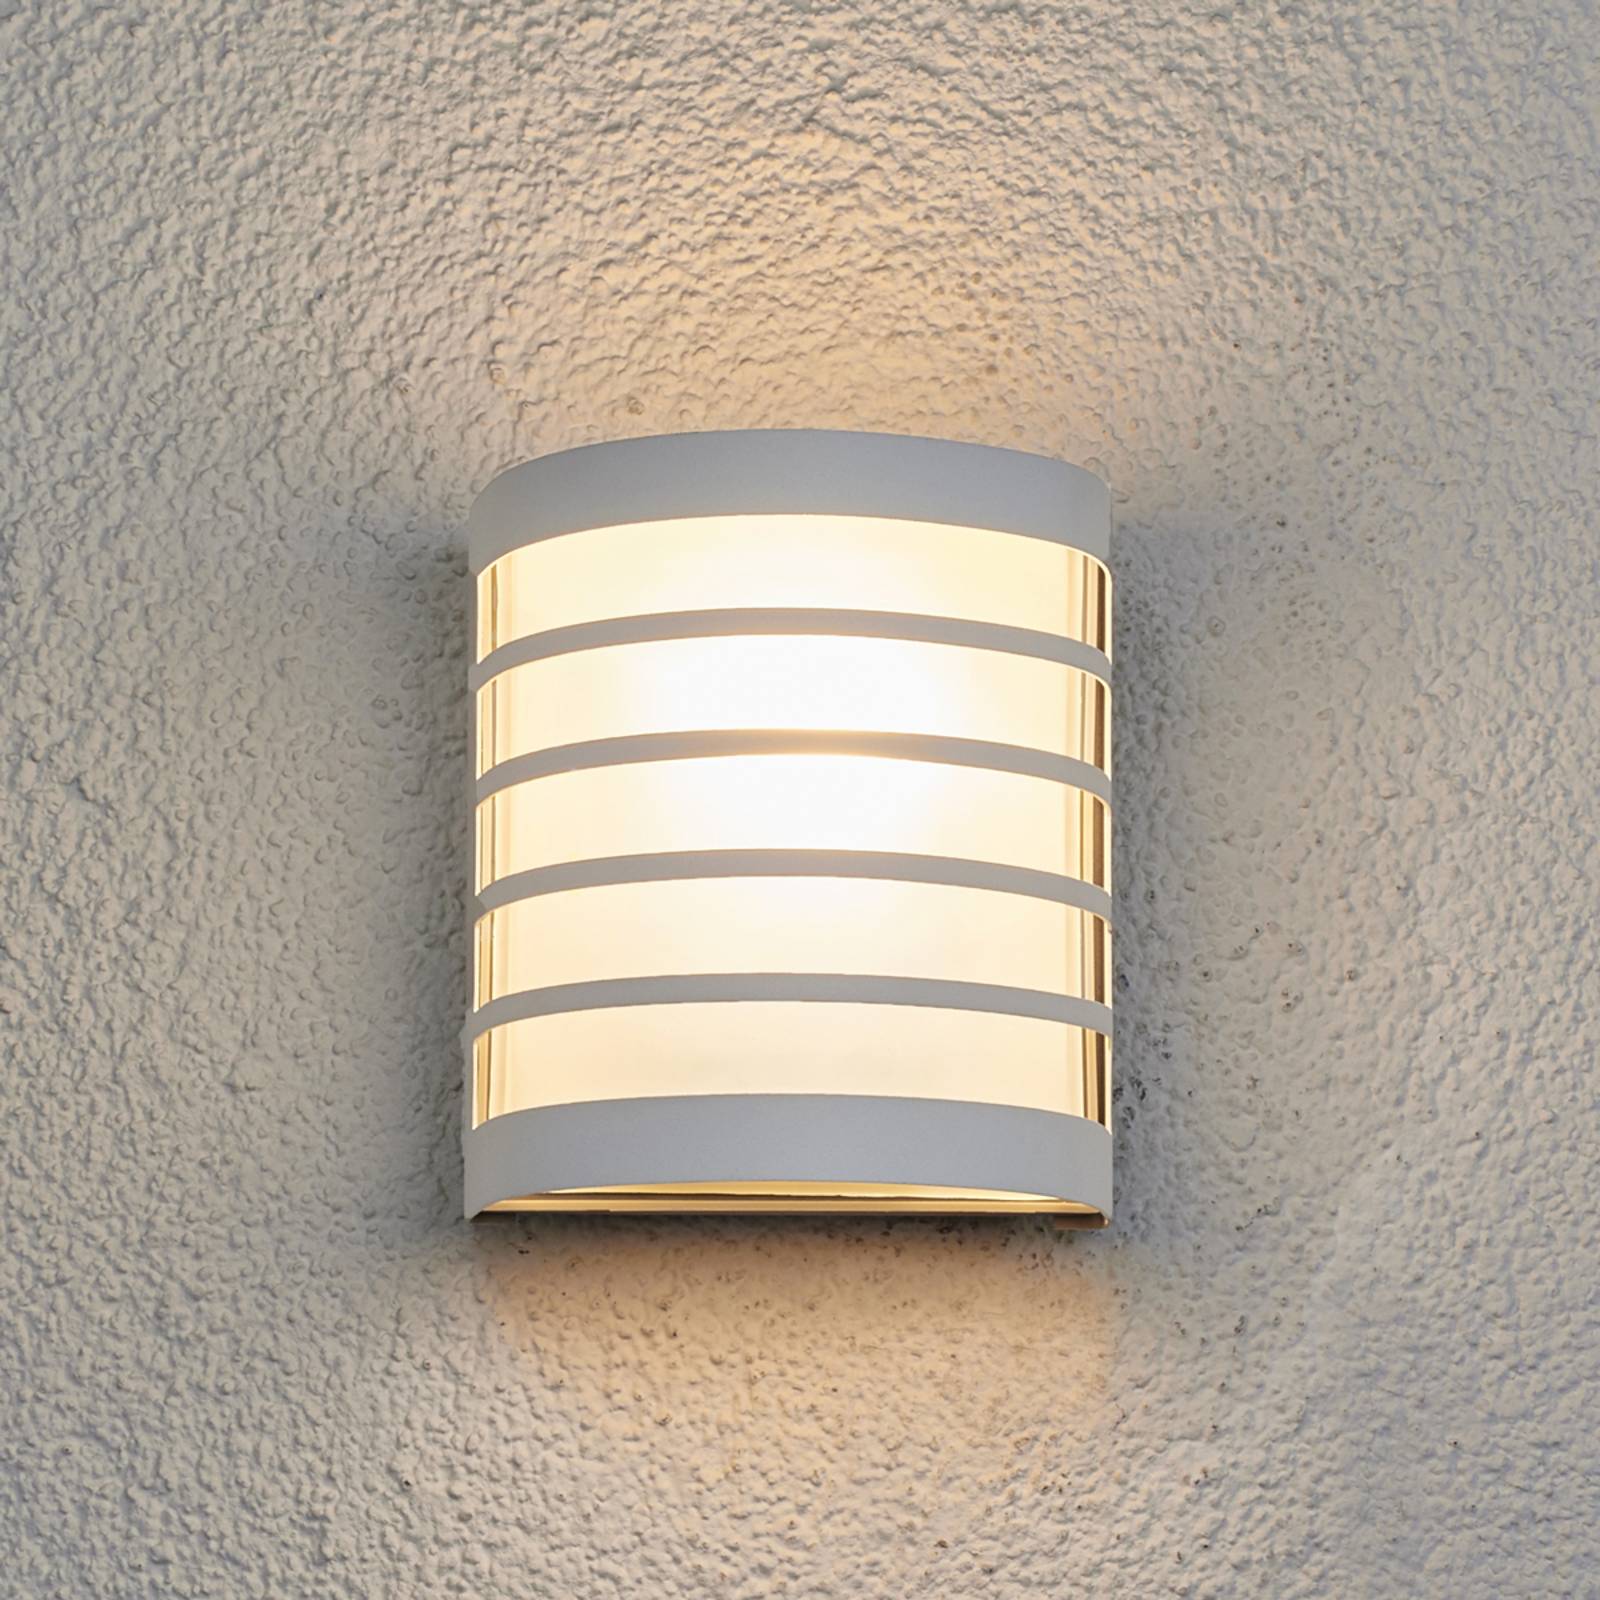 Photos - Floodlight / Street Light Lindby Calin white outdoor wall light with a striped look 